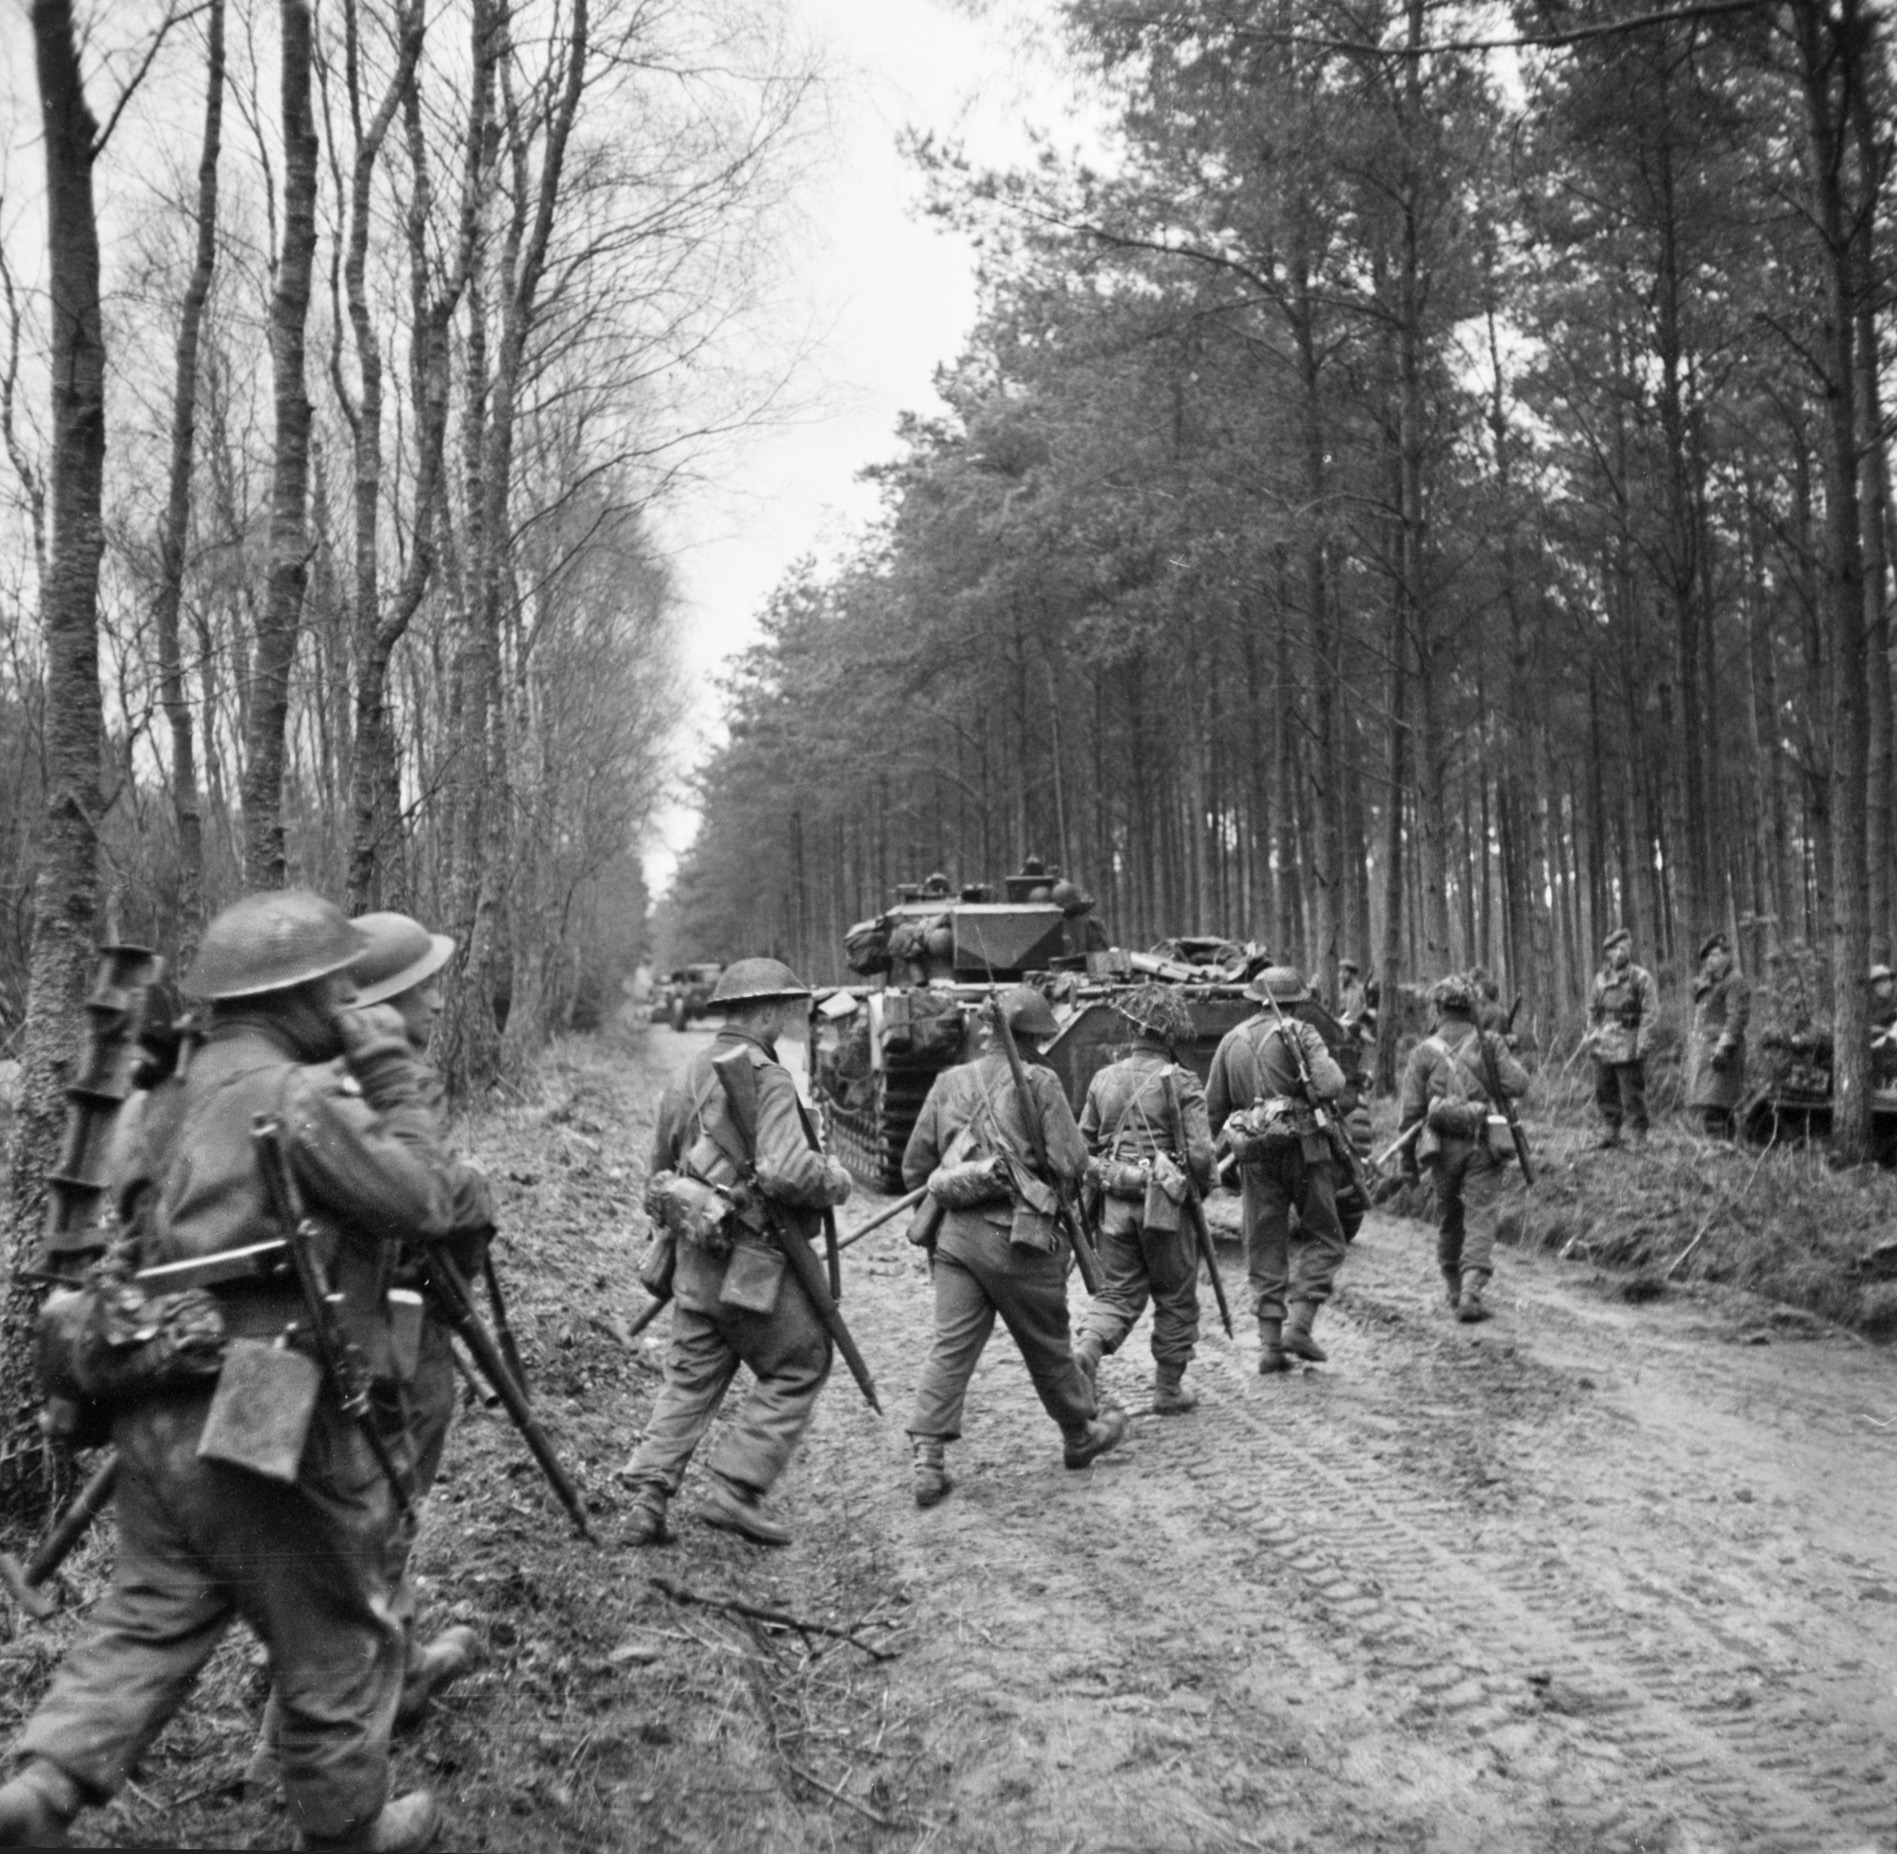 British soldiers of the 2nd Seaforth Highlanders march along a muddy road in the Reichswald accompanied by a supporting medium tank. 